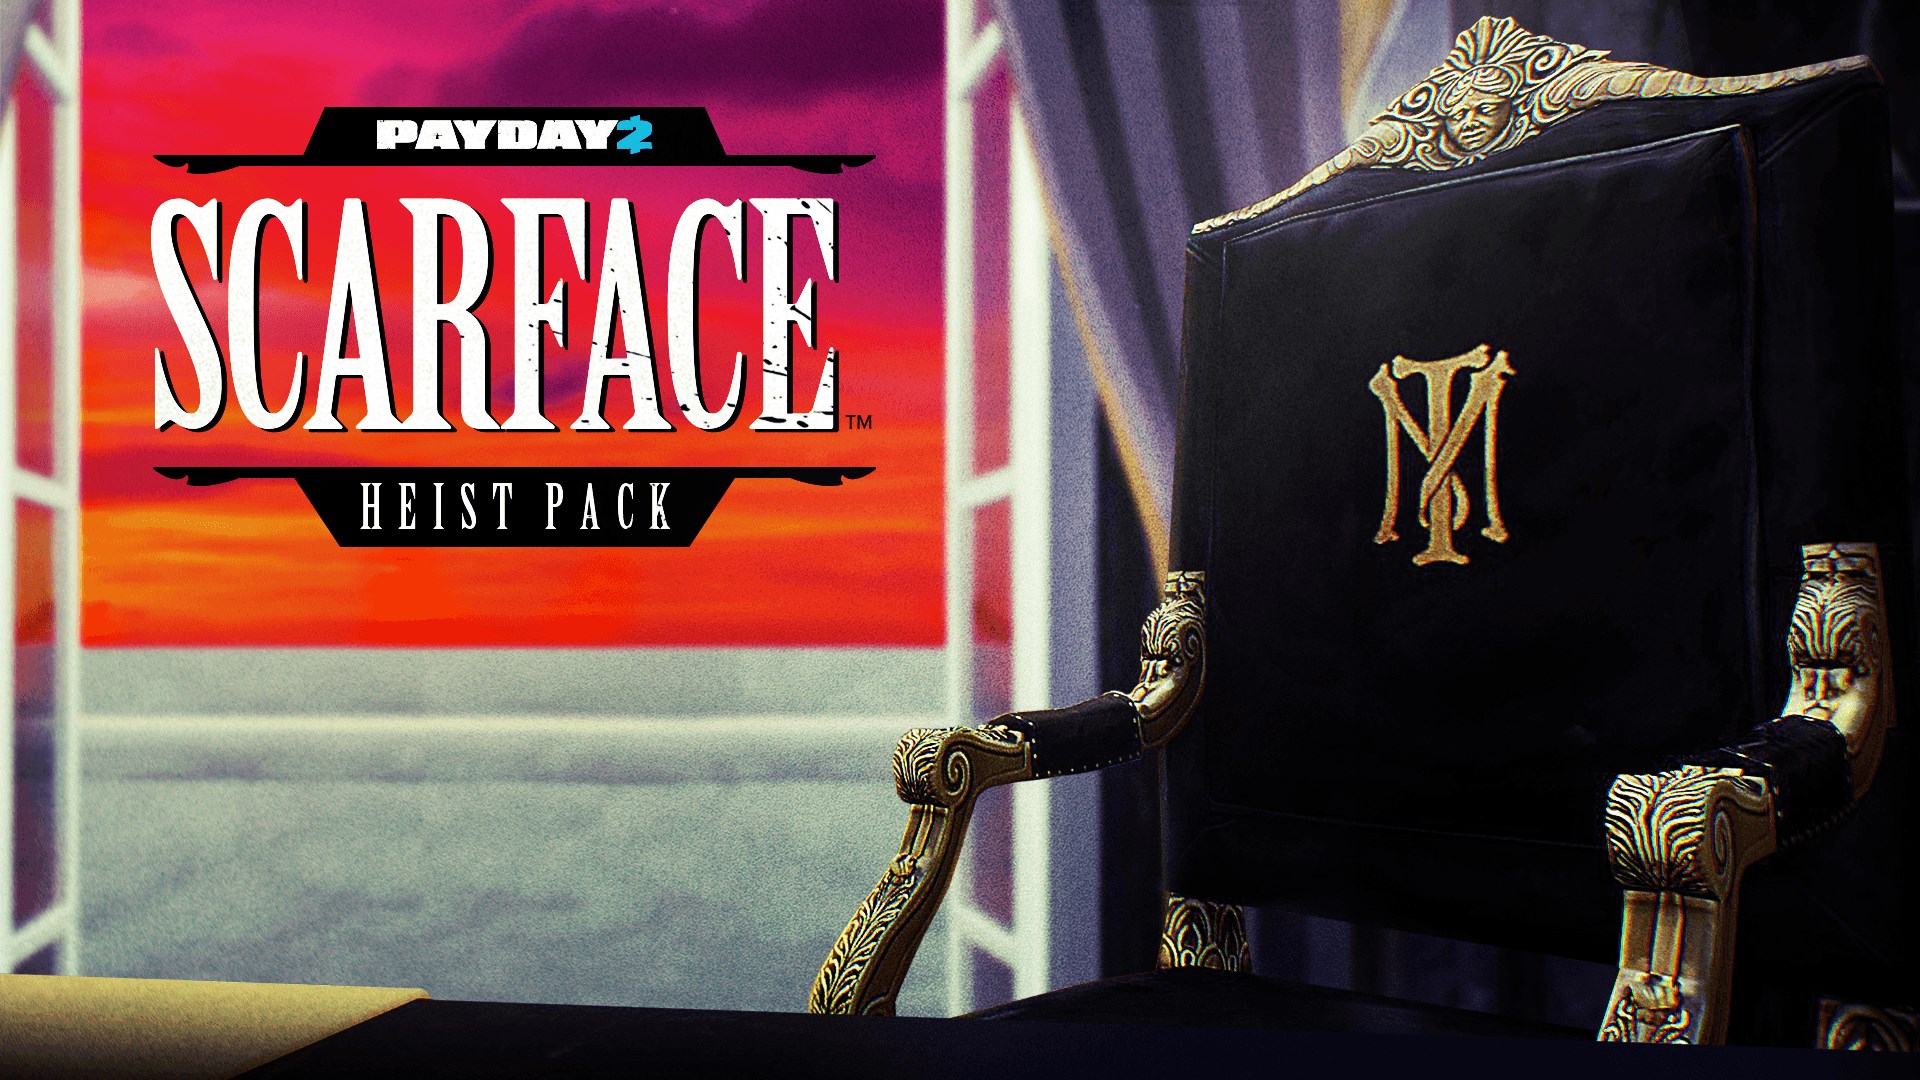 download payday 2 scarface